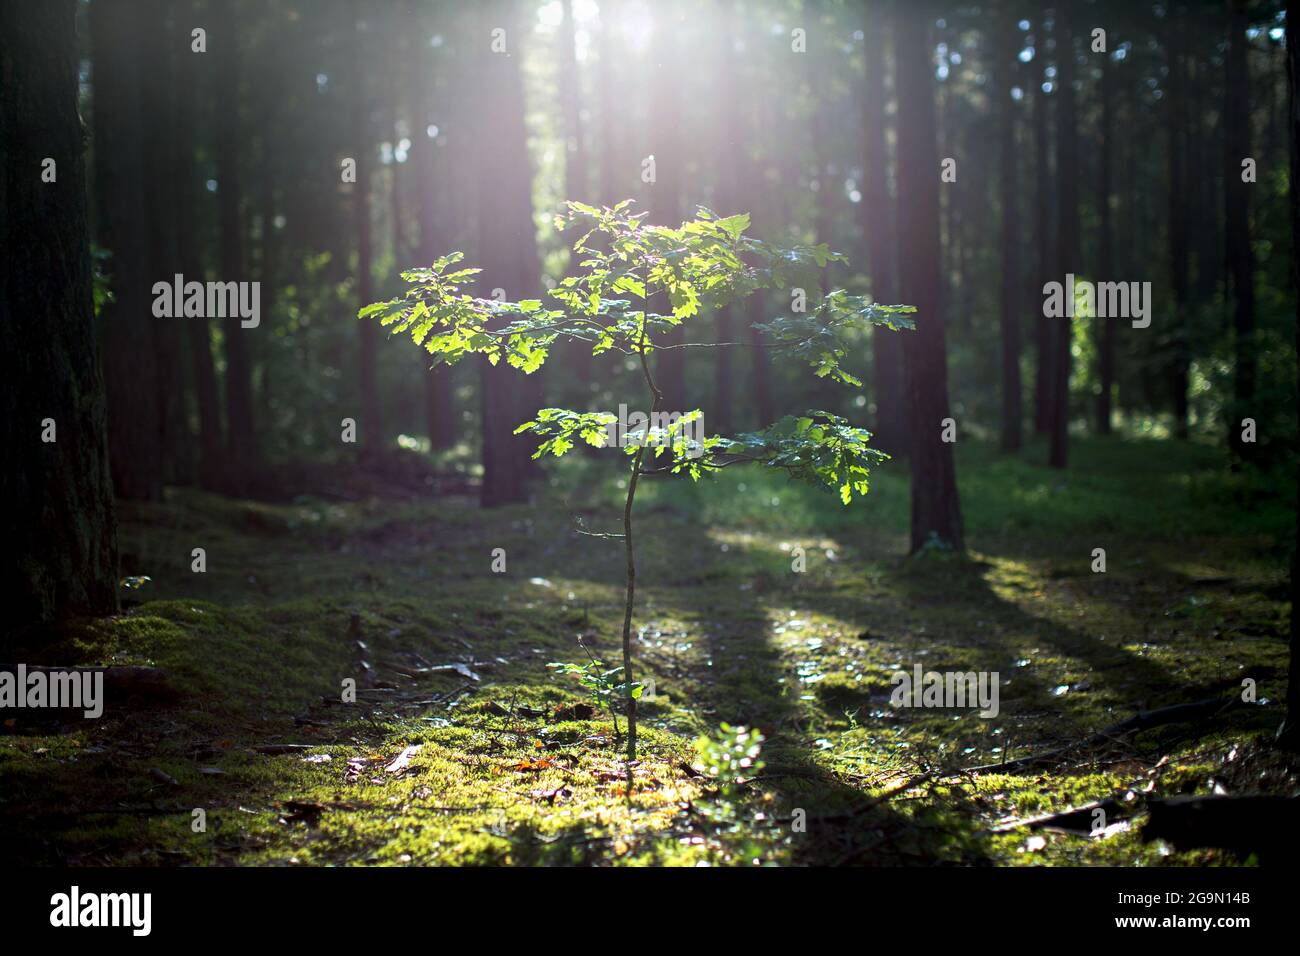 Young oak tree growing in the forest, lit by the sun Stock Photo